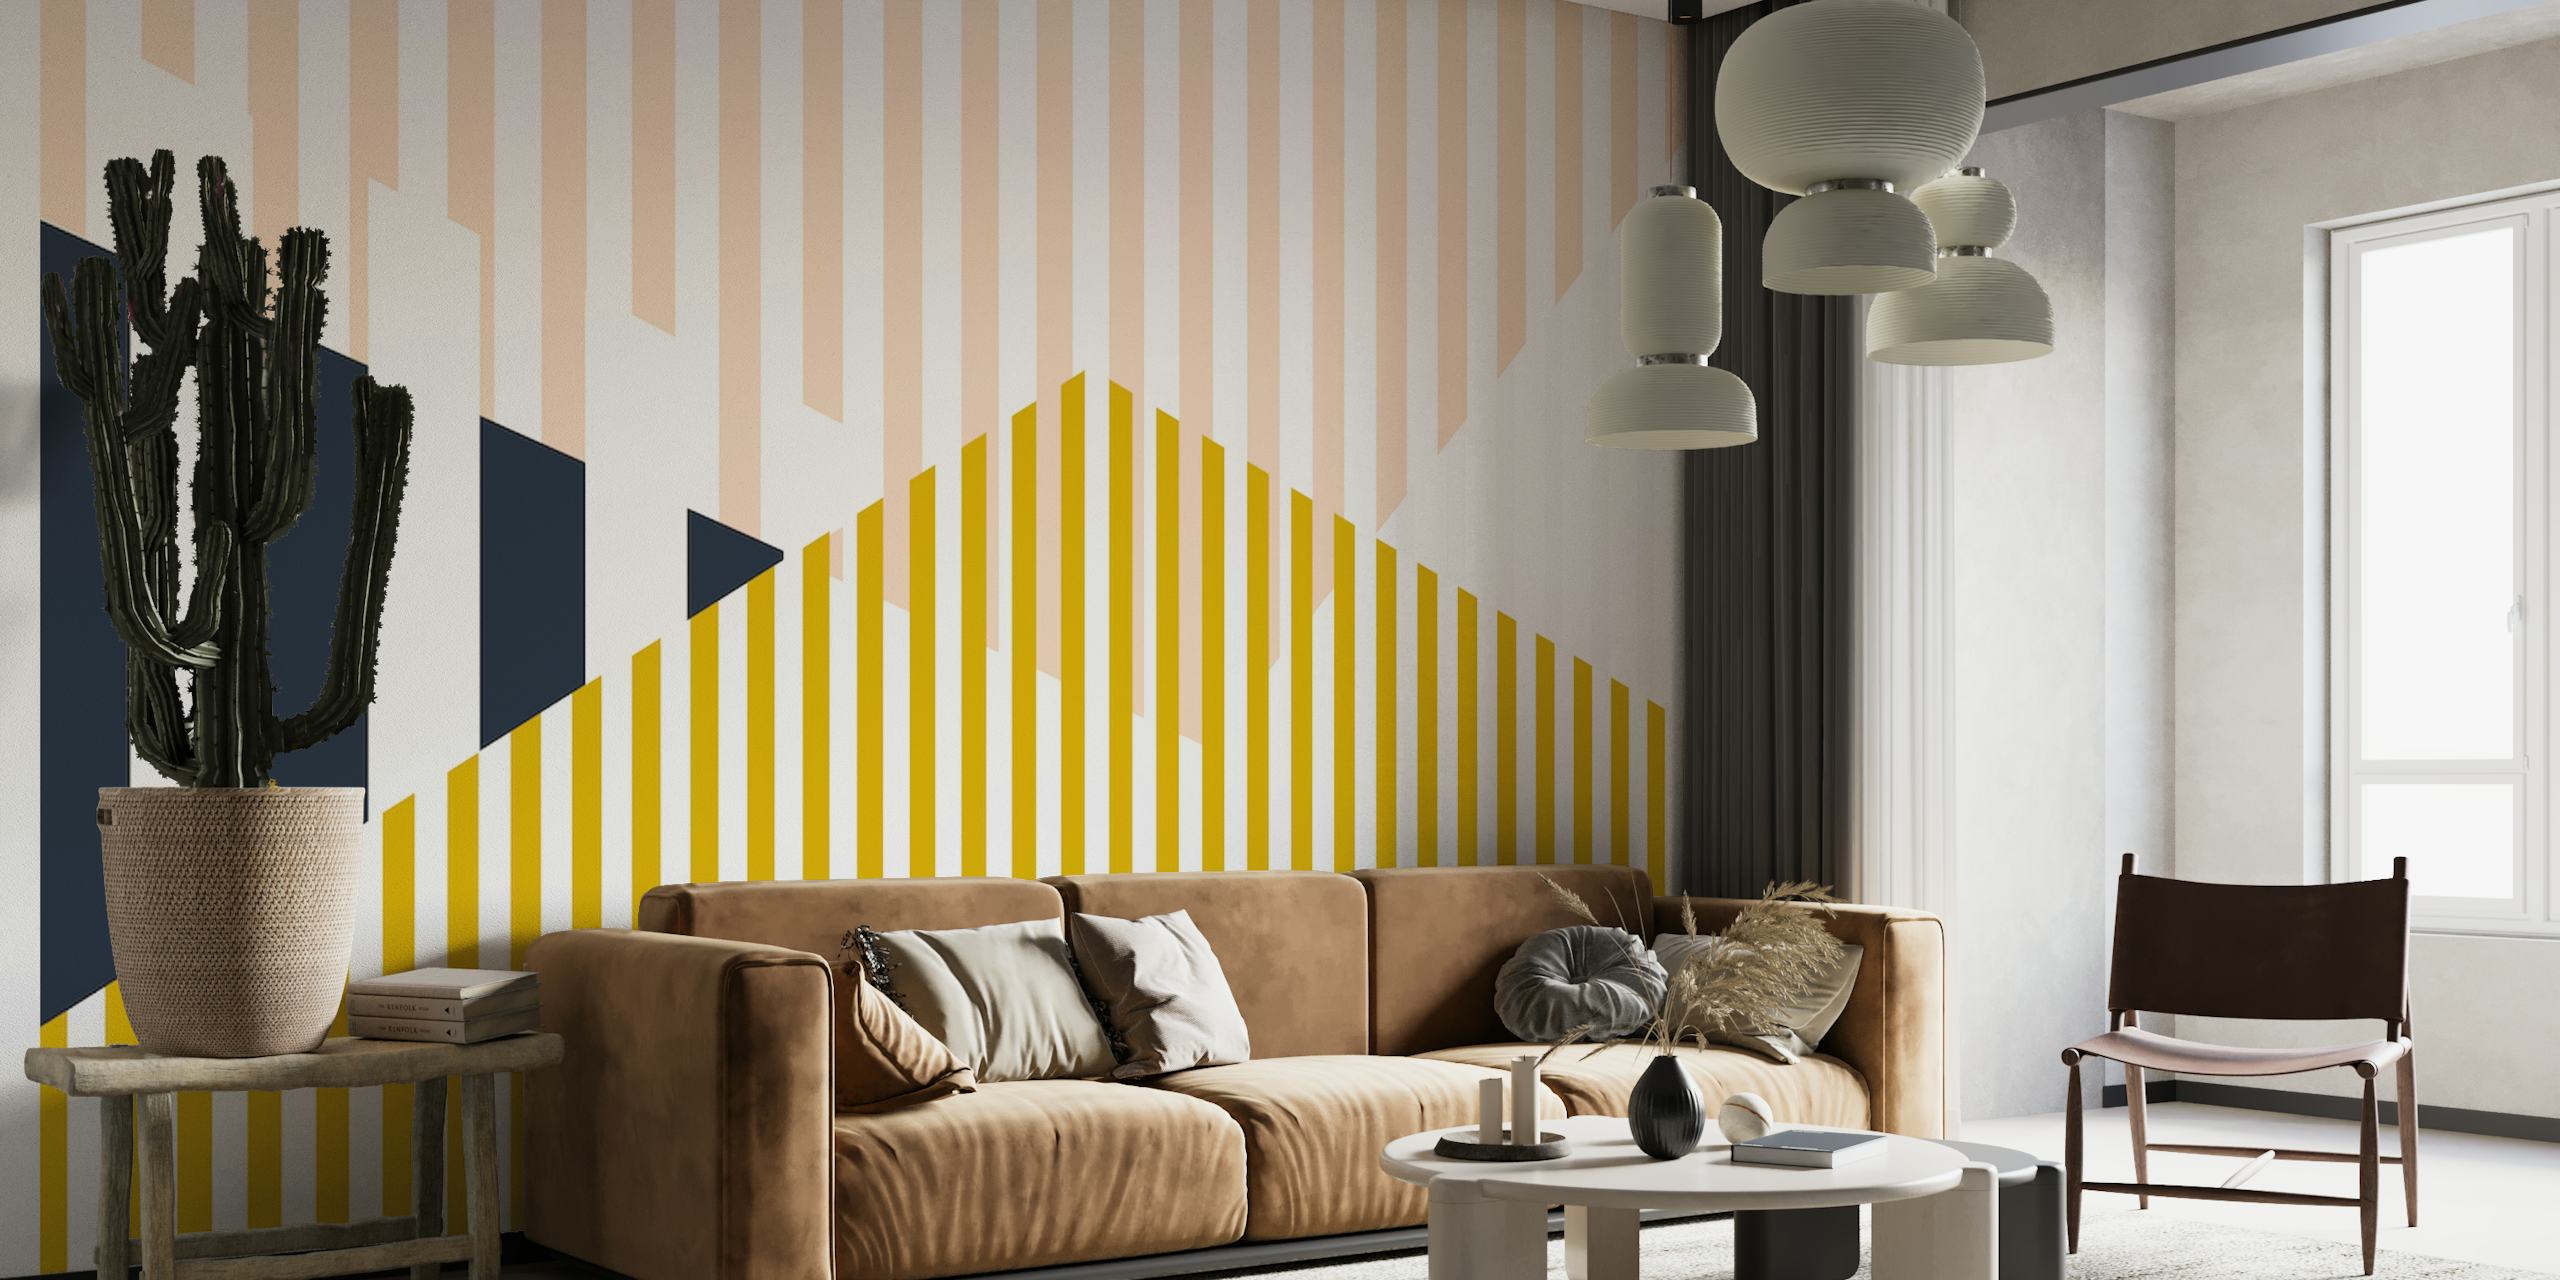 Timeless Mikado Mustard geometric wall mural with mustard, black, and soft pink shapes